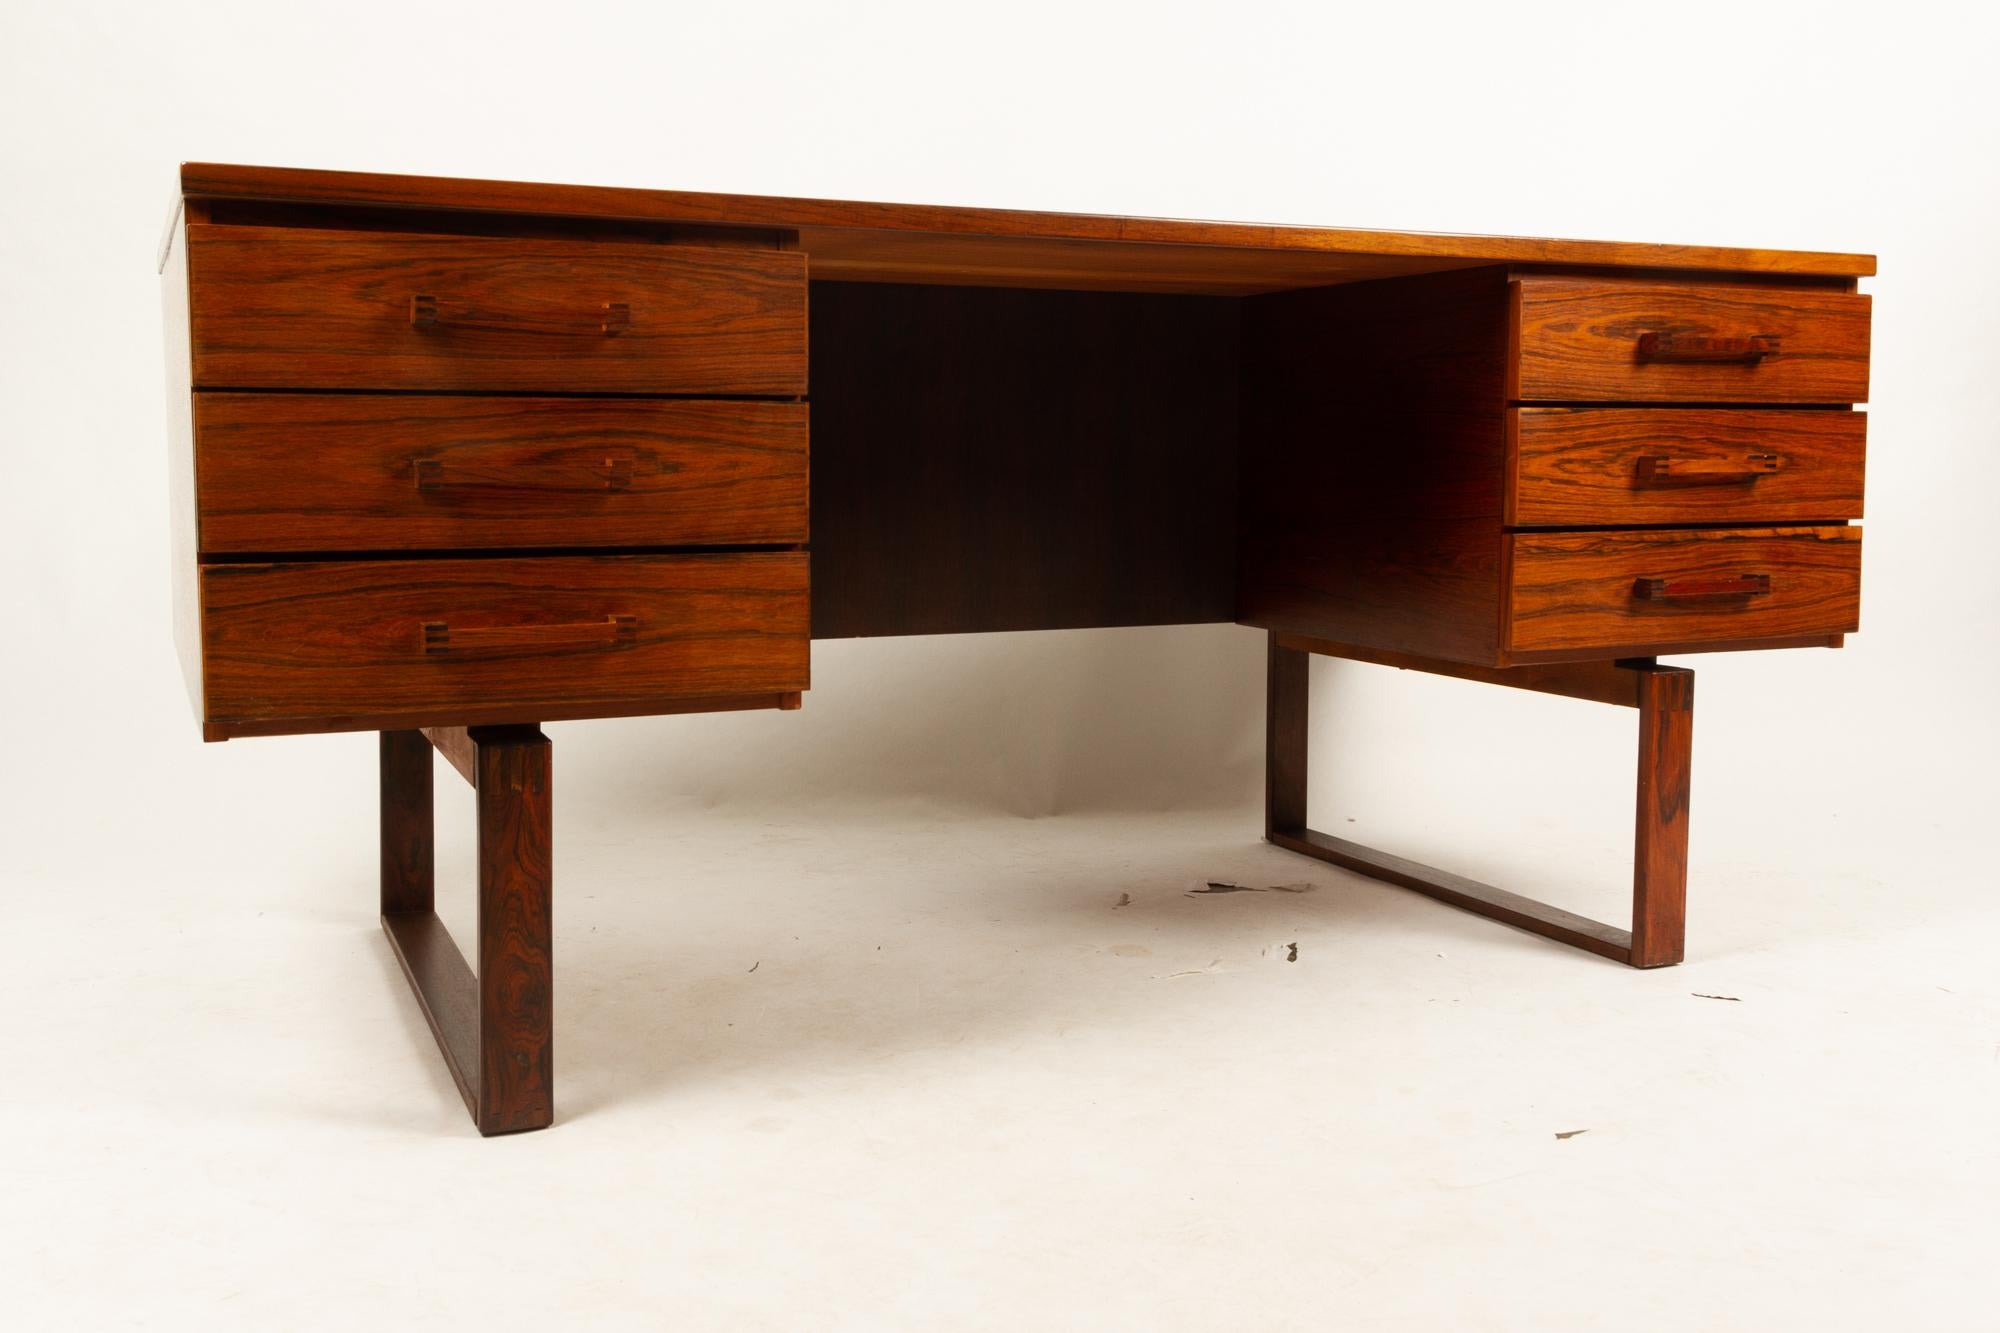 Danish vintage rosewood desk by Henning Jensen & Torben Valeur for Munch Møbler, 1960s
Large executive desk in beautiful vivid rosewood veneer. Two drawer sections with three drawers each. Back with one long open shelf. Large and deep work surface